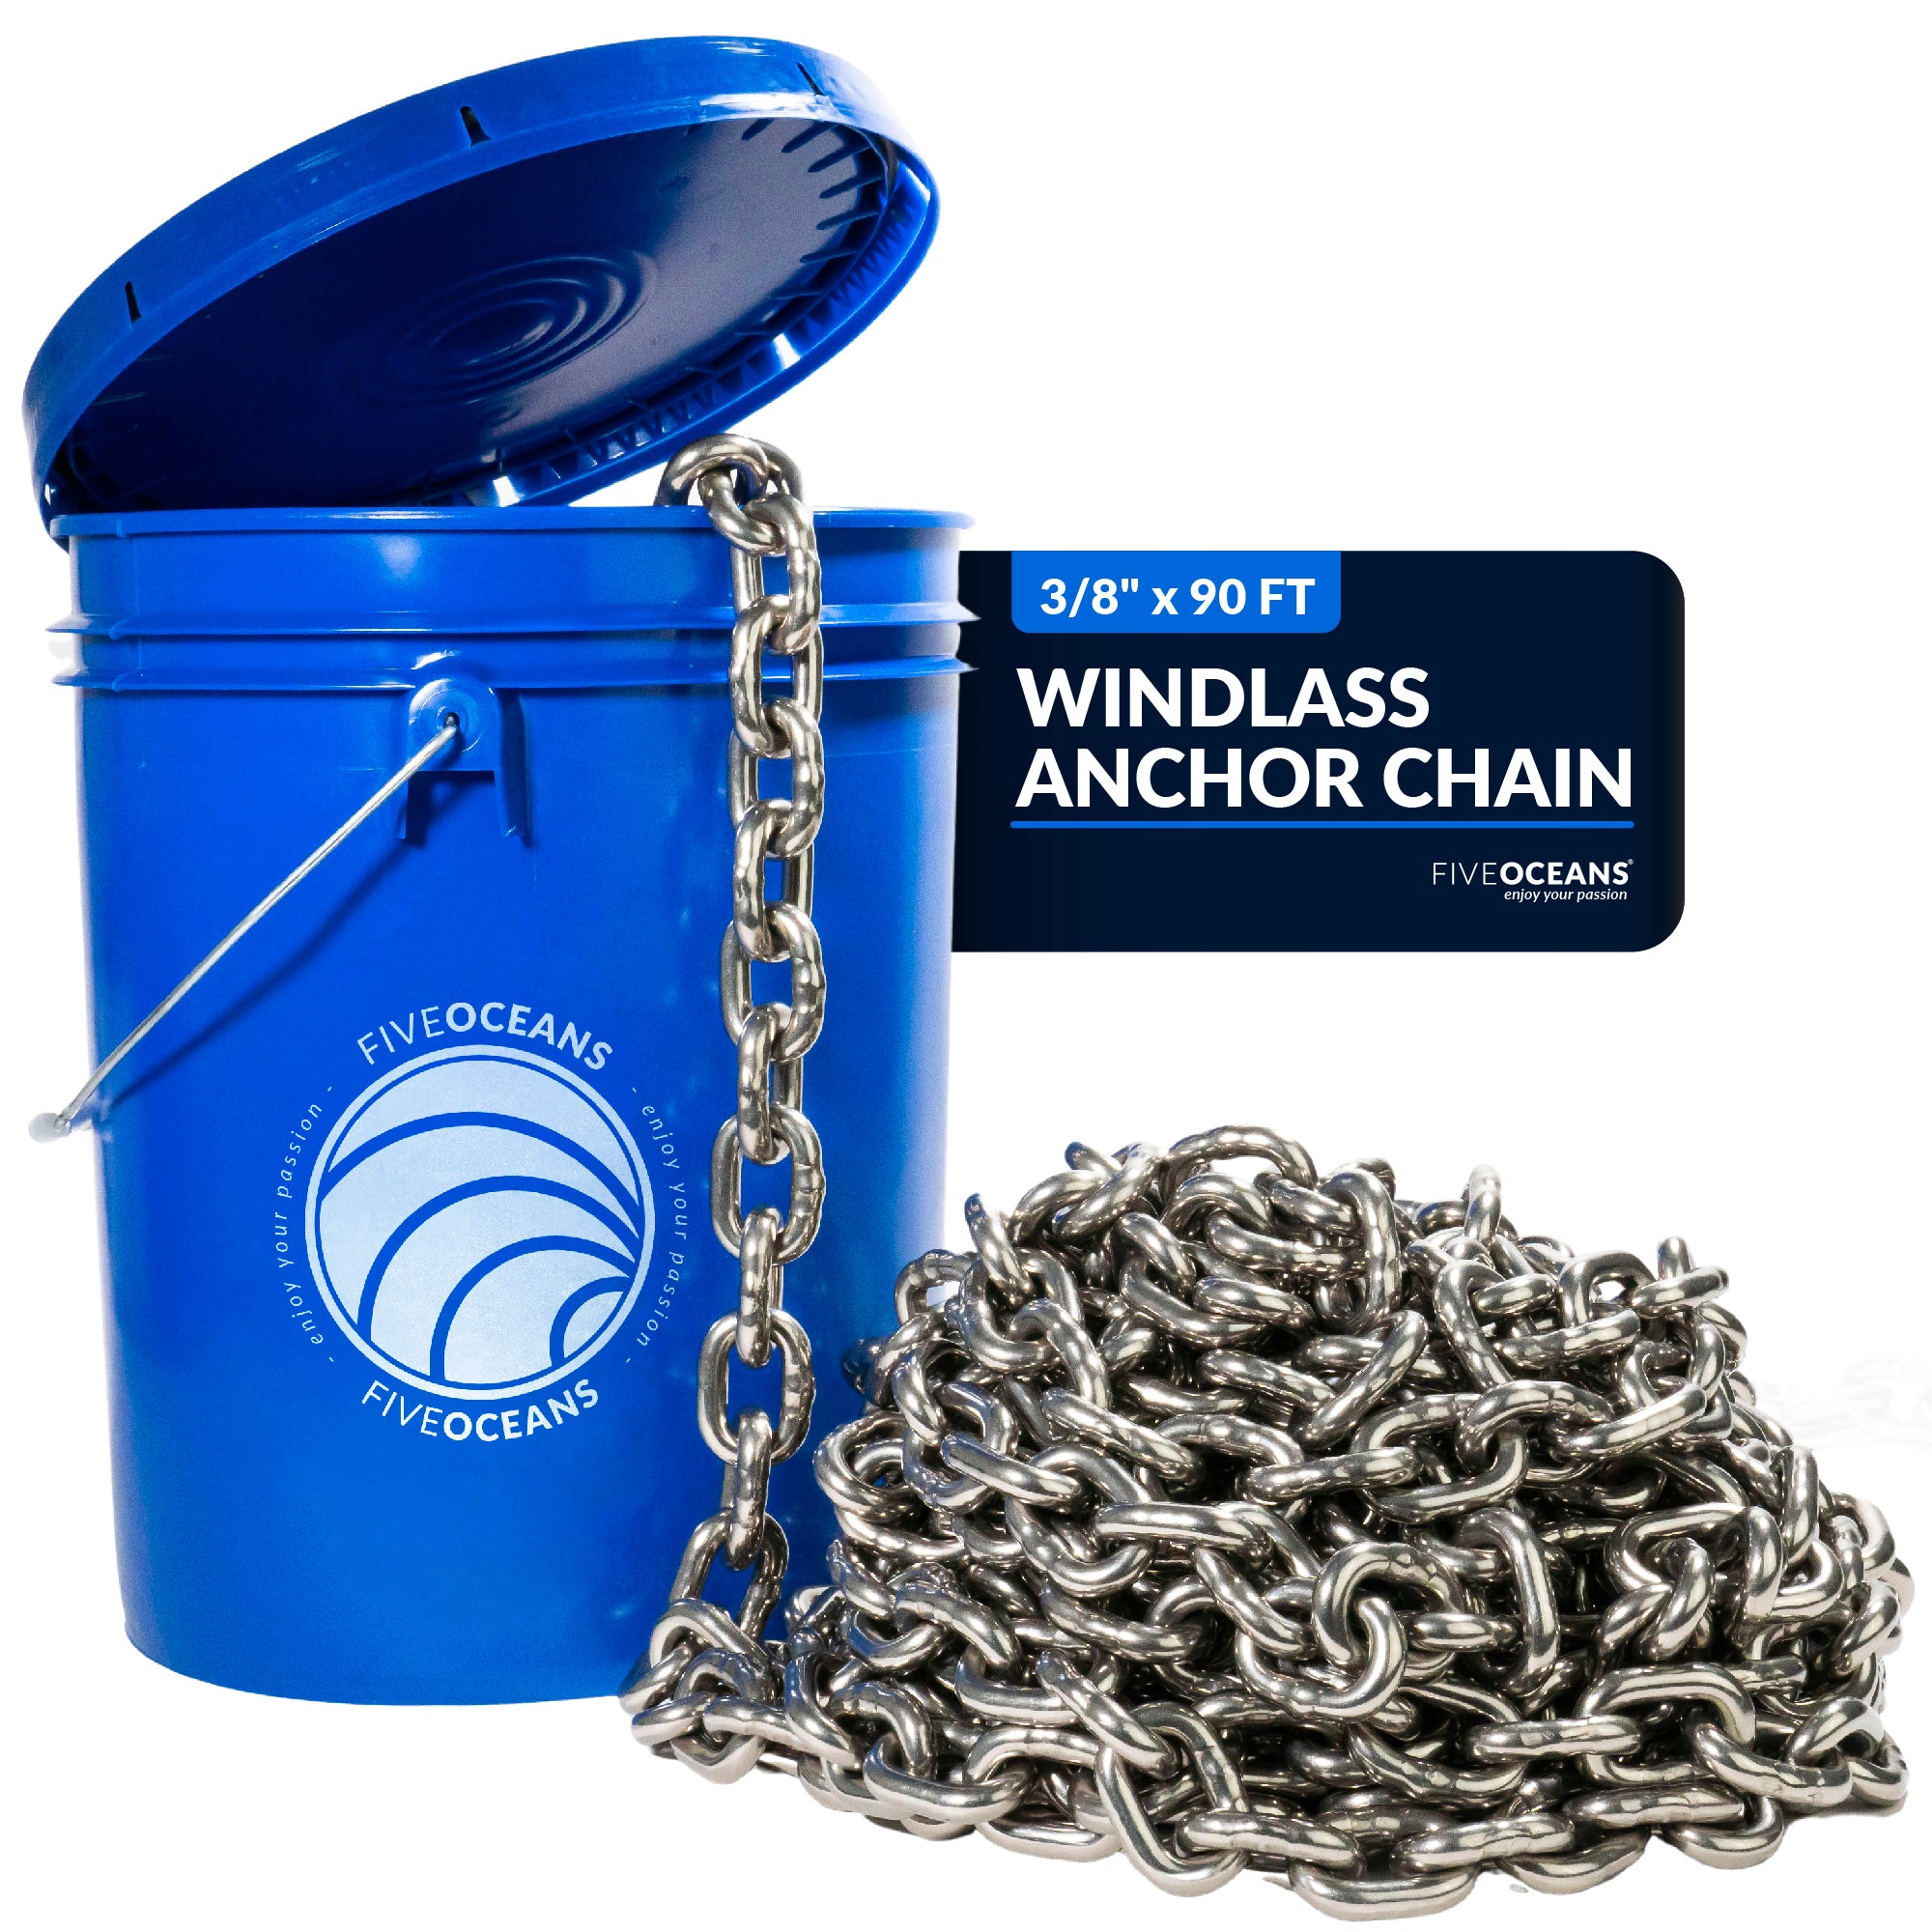 3/8" x 90' Boat Windlass Anchor Chain HT G4 Stainless Steel - FO4494-M90